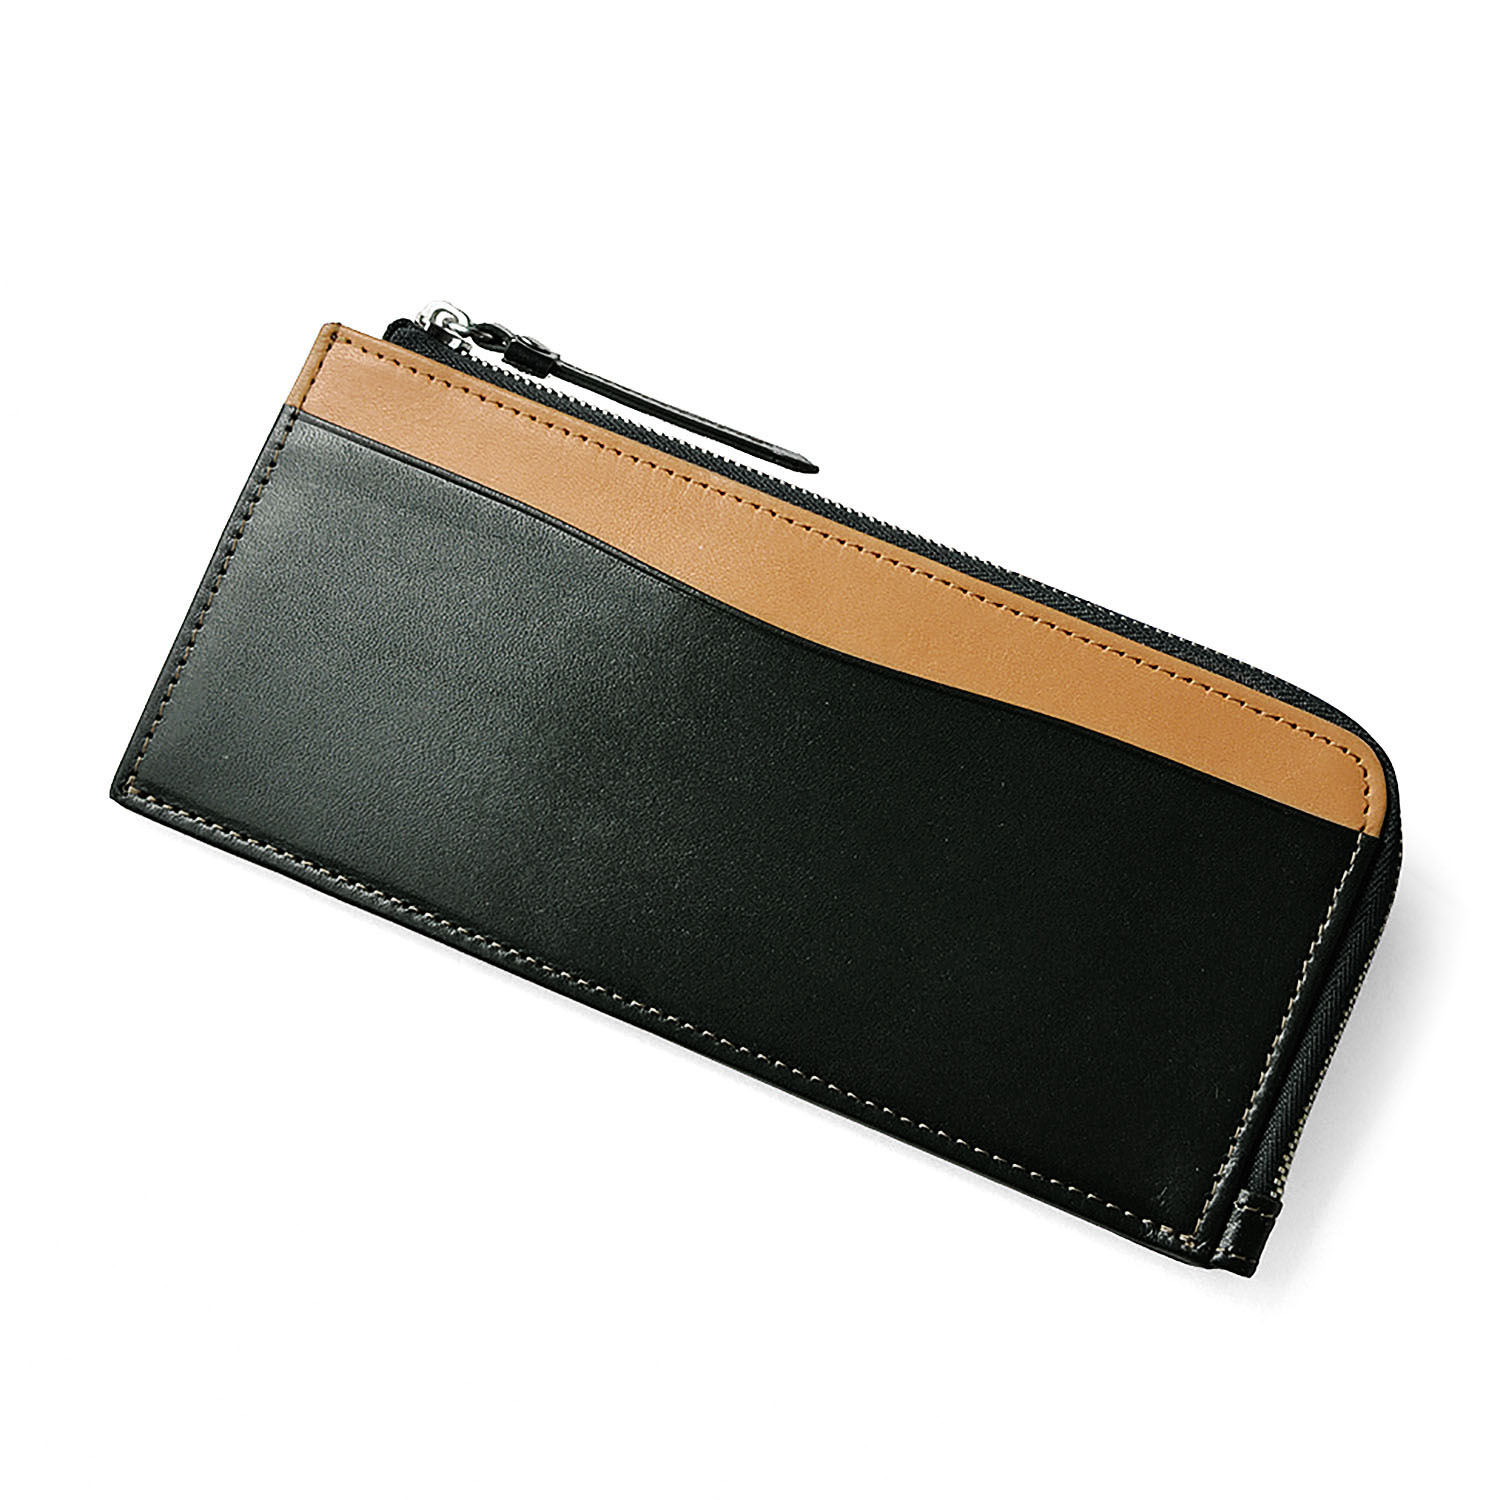 Re:Credo【SMALL LEATHER GOODS】フラグメントケースL 35-5078